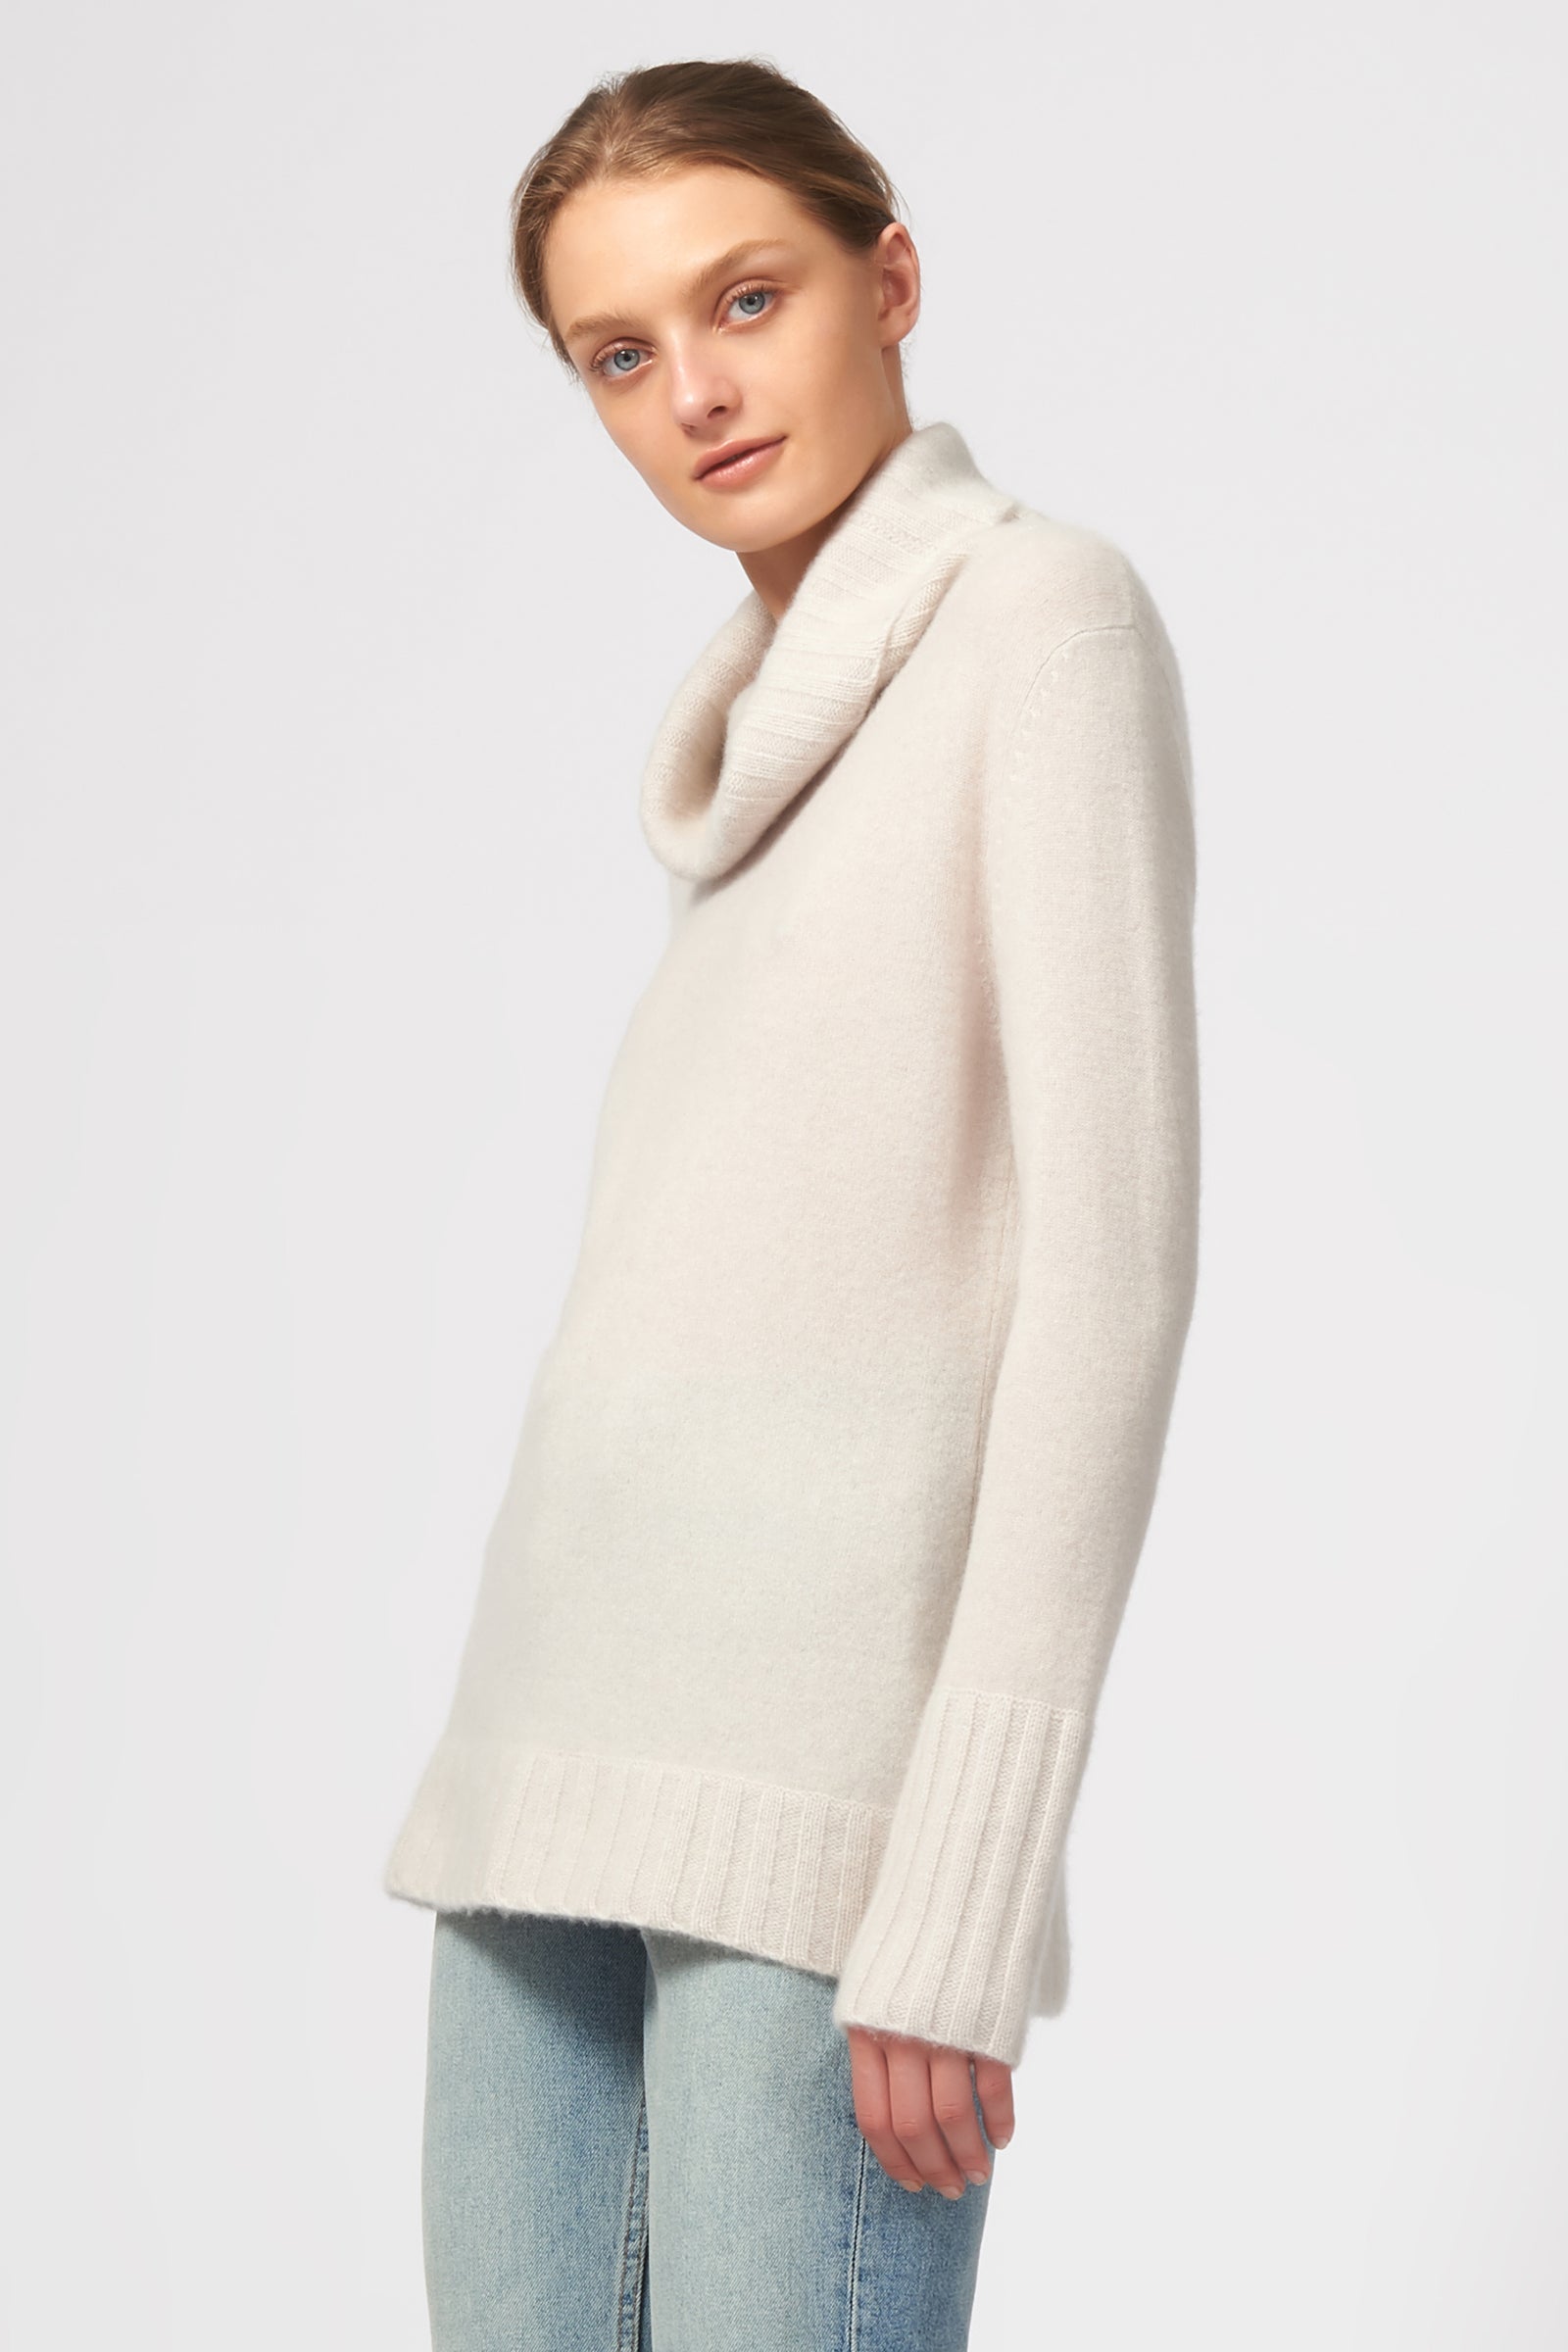 Cashmere Cowel T-Neck in Haze Made From 100% Cashmere – KAL RIEMAN